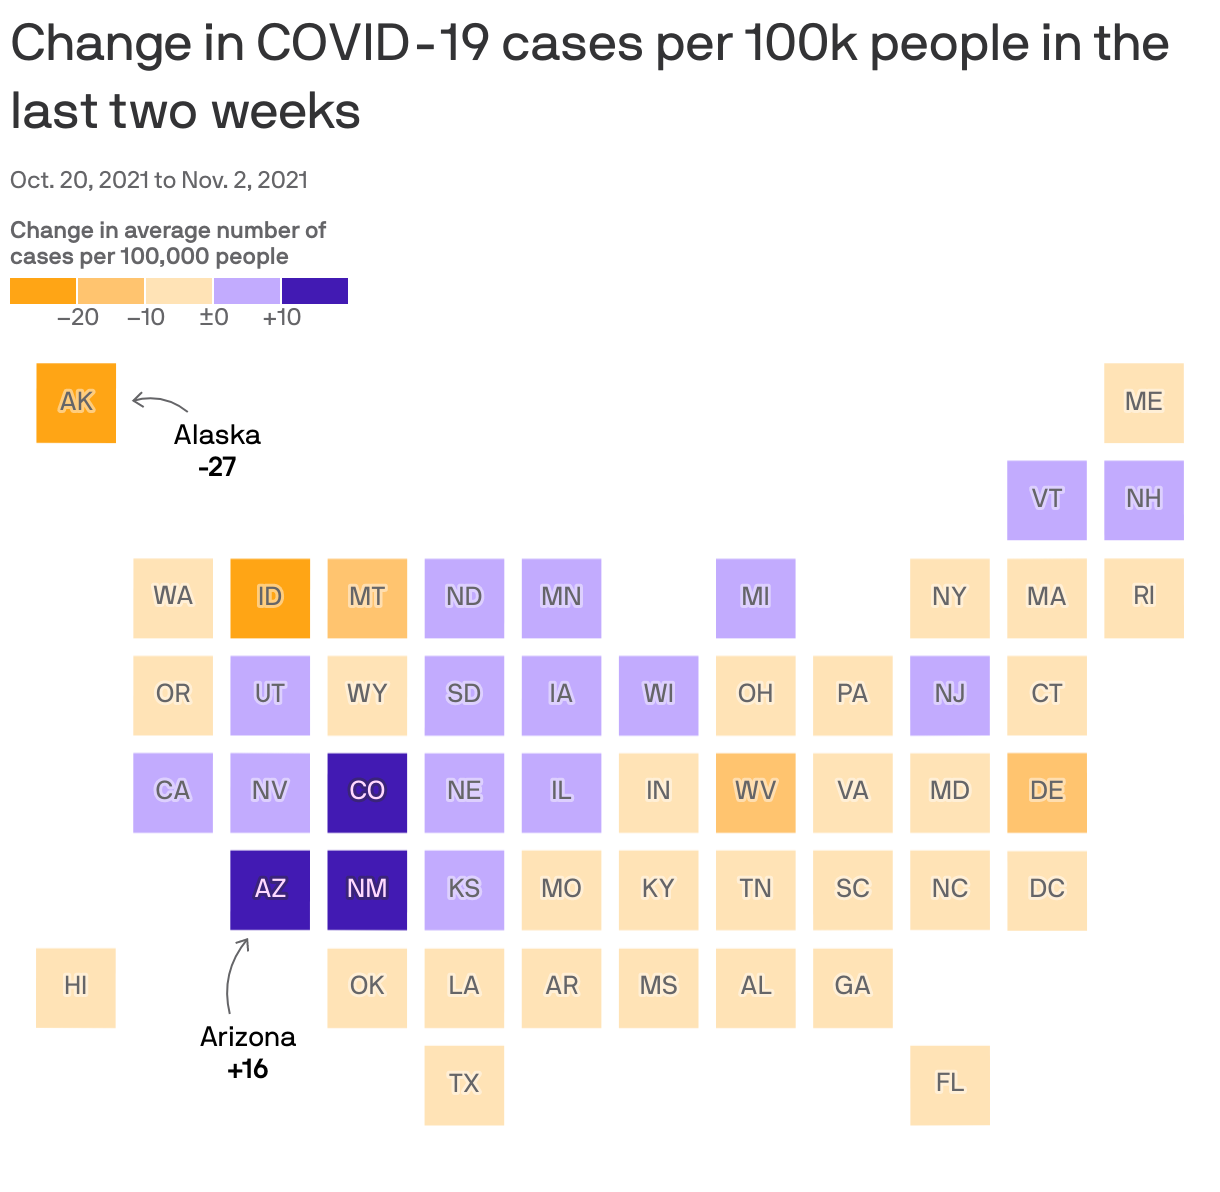 Change in COVID-19 cases per 100k people in the last two weeks